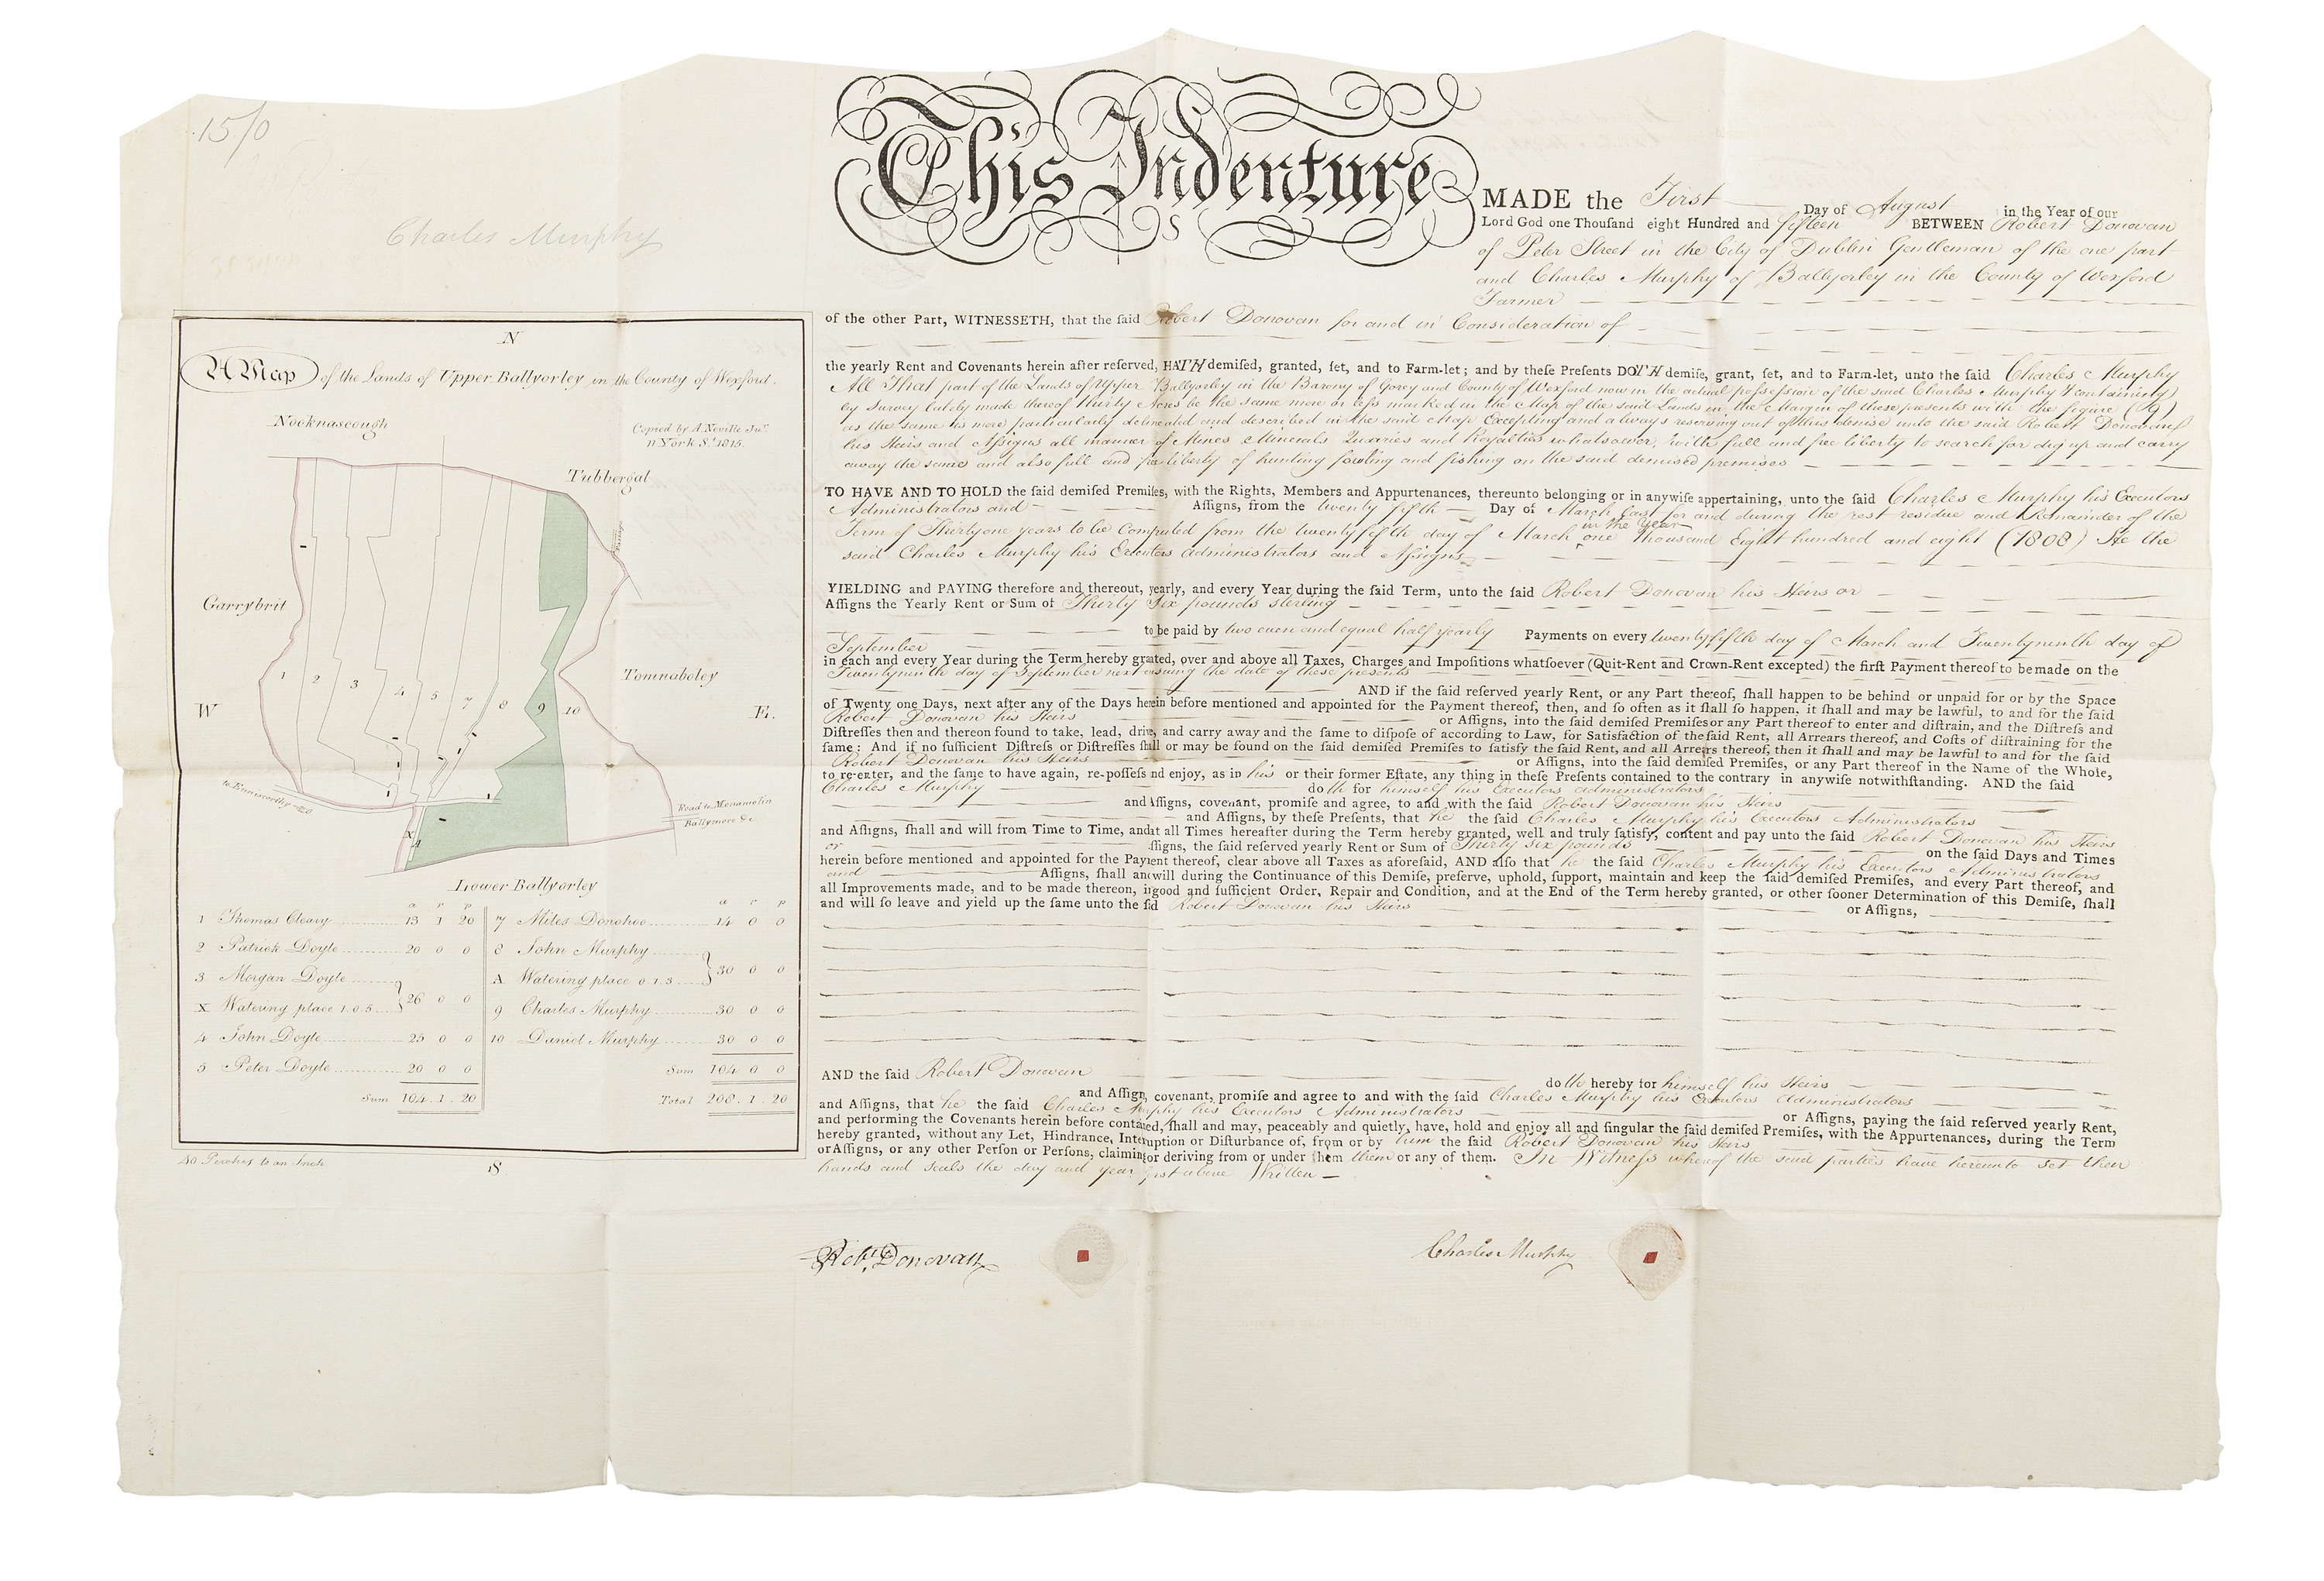 A LEASE OF PART OF THE LANDS OF UPPER BALLYORLEY ,in the Co. of Wexford dated 1st August 1815.